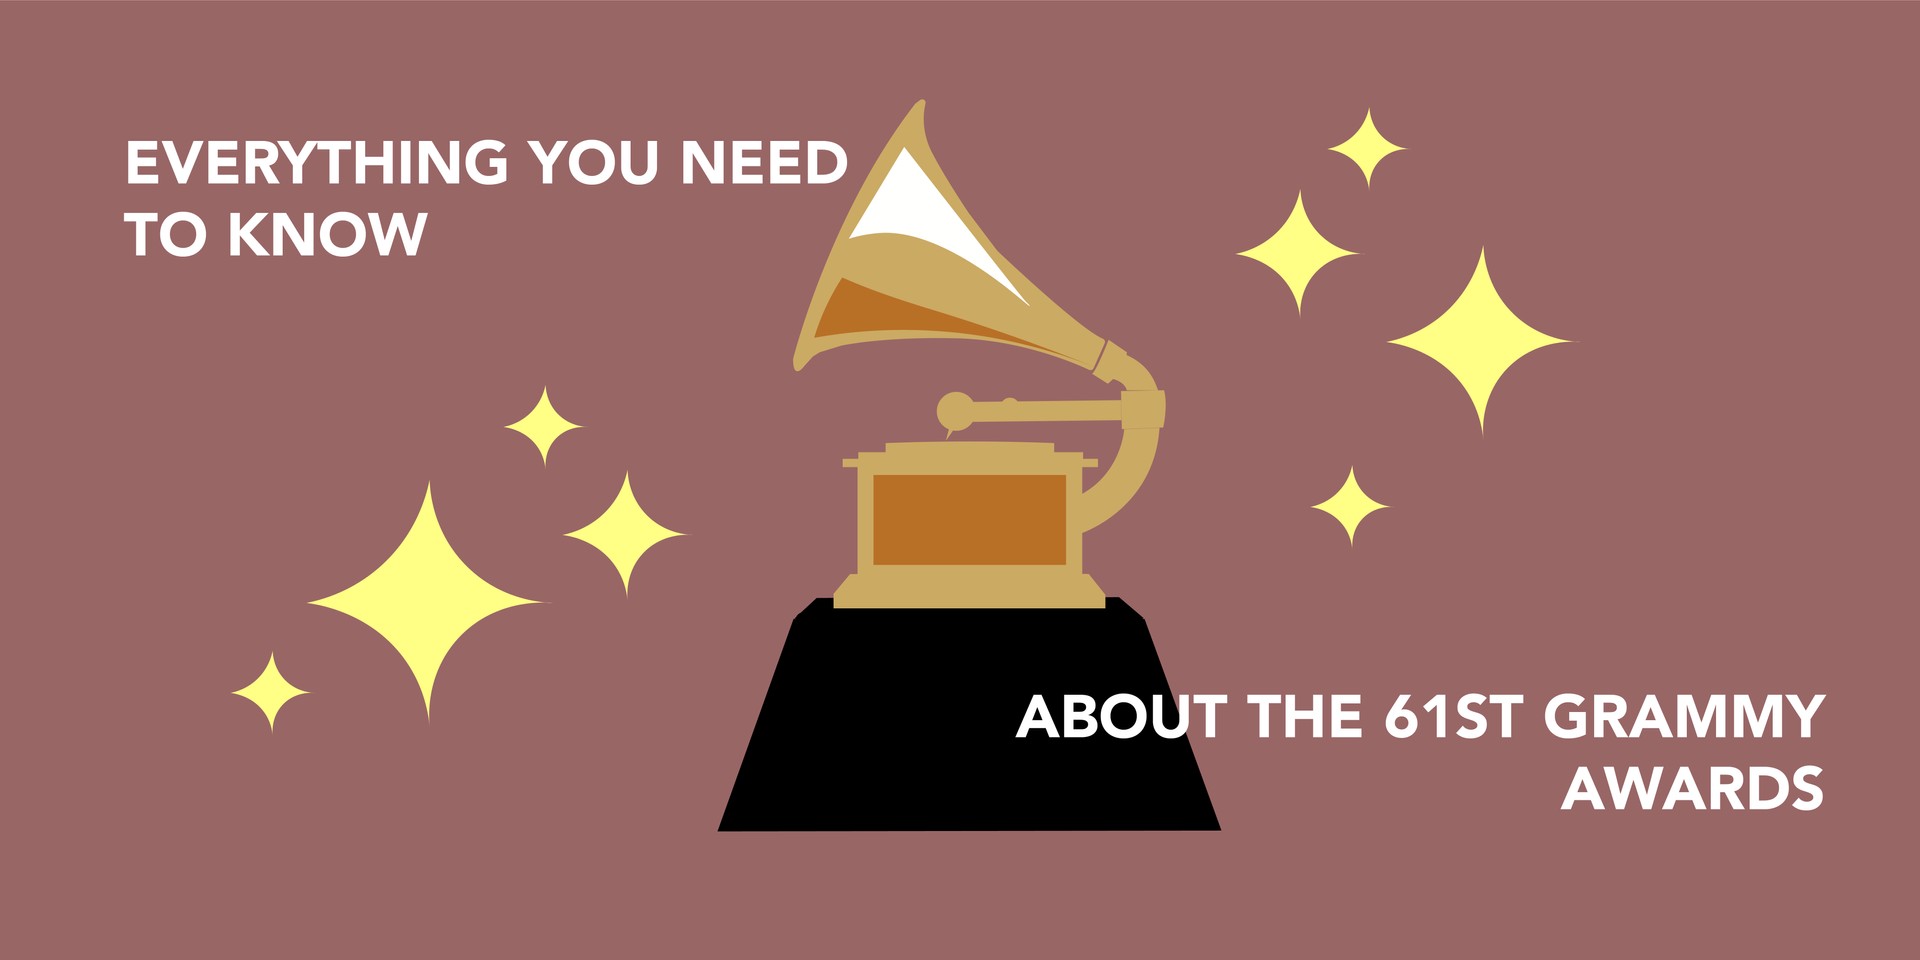 Everything you need to know about the 61st Grammy Awards